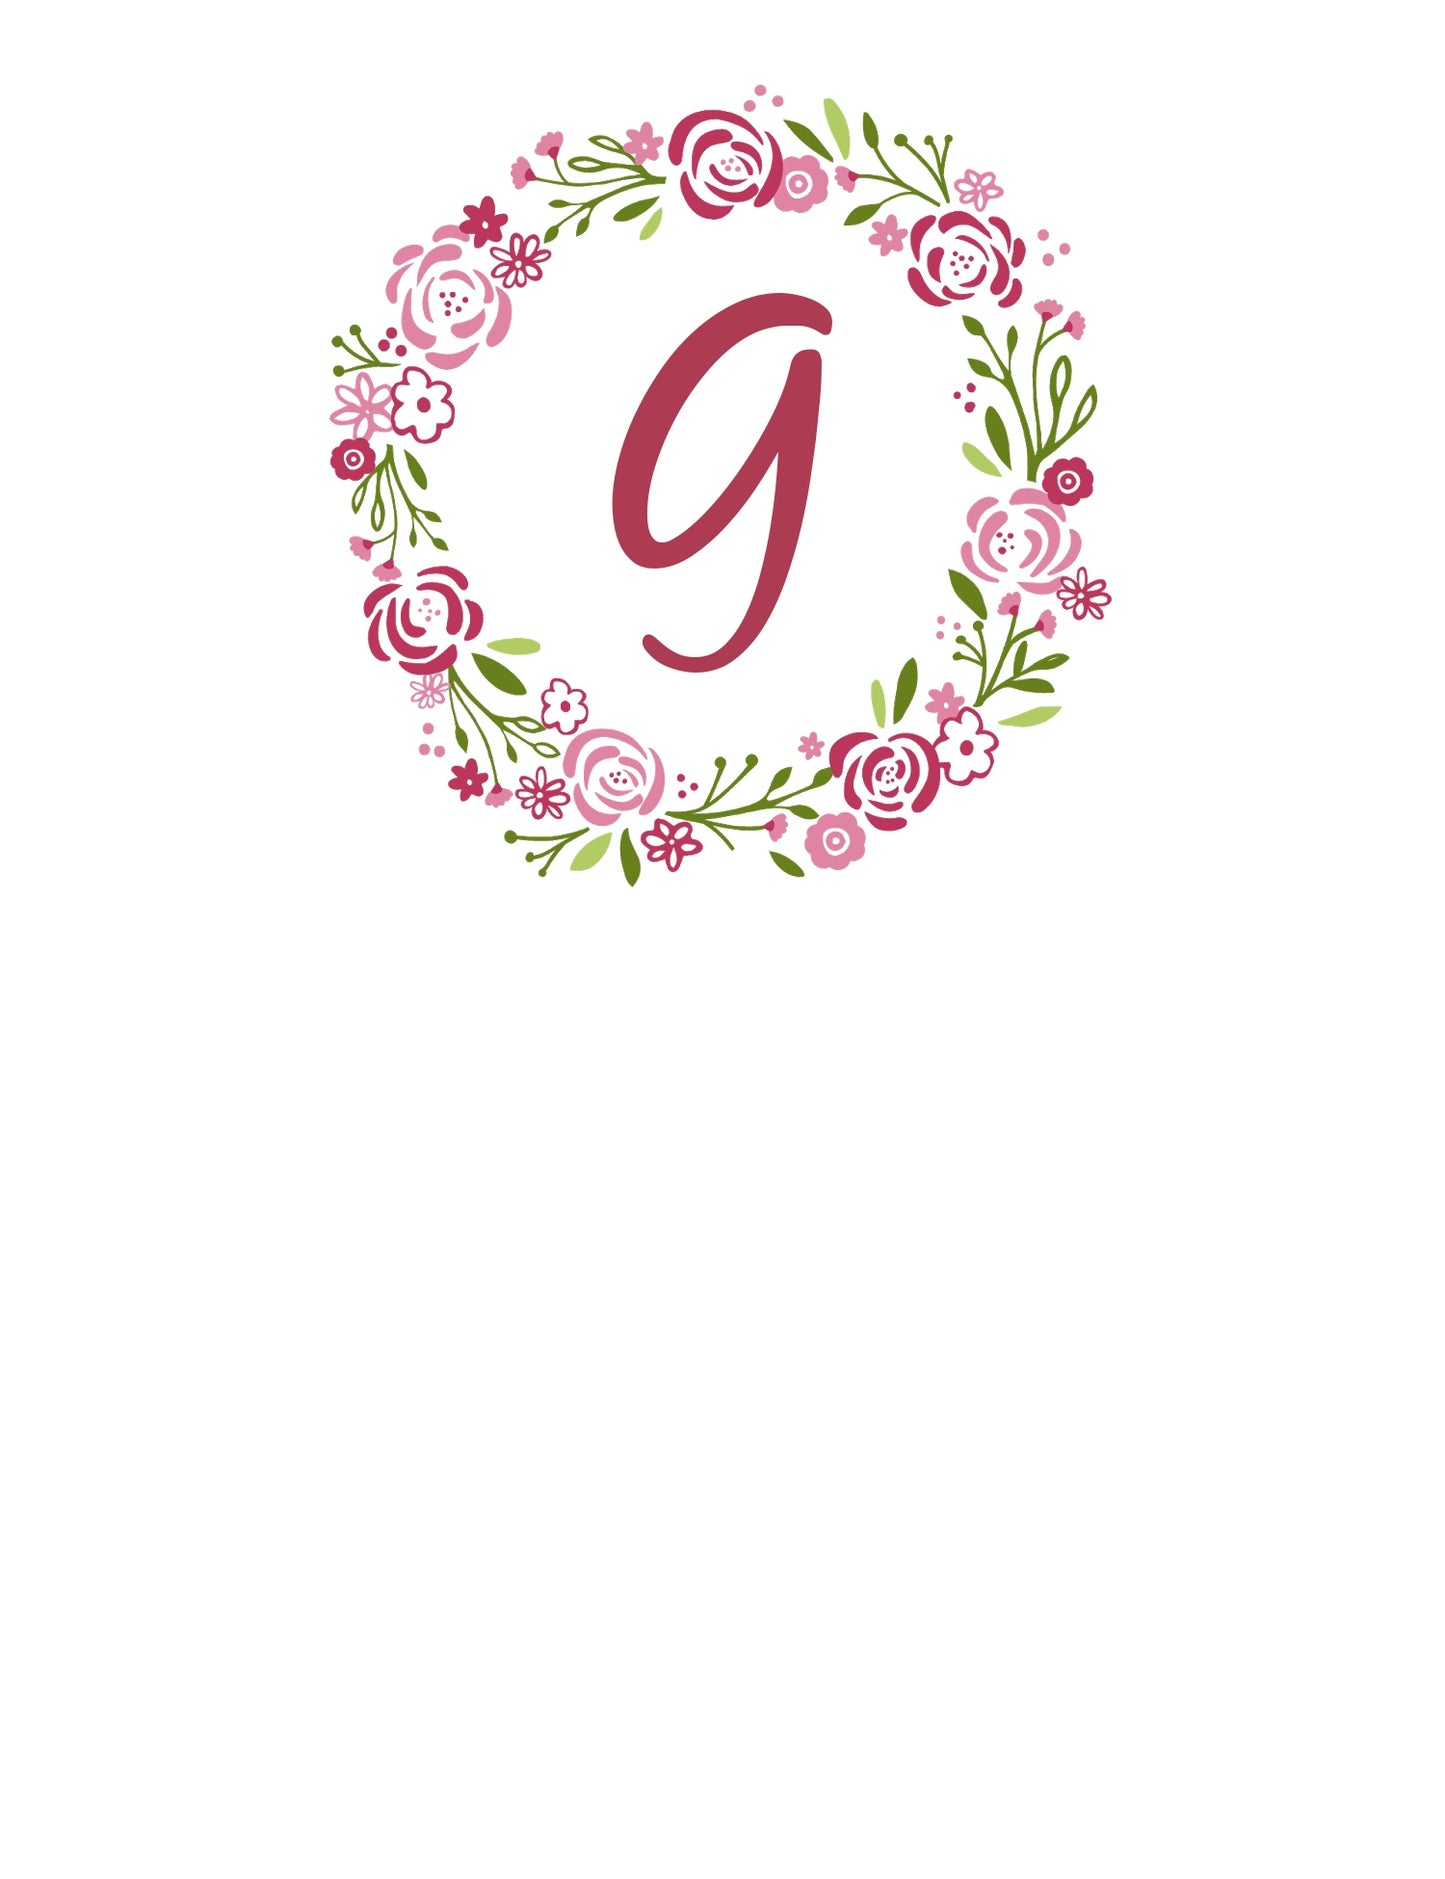 The letter G